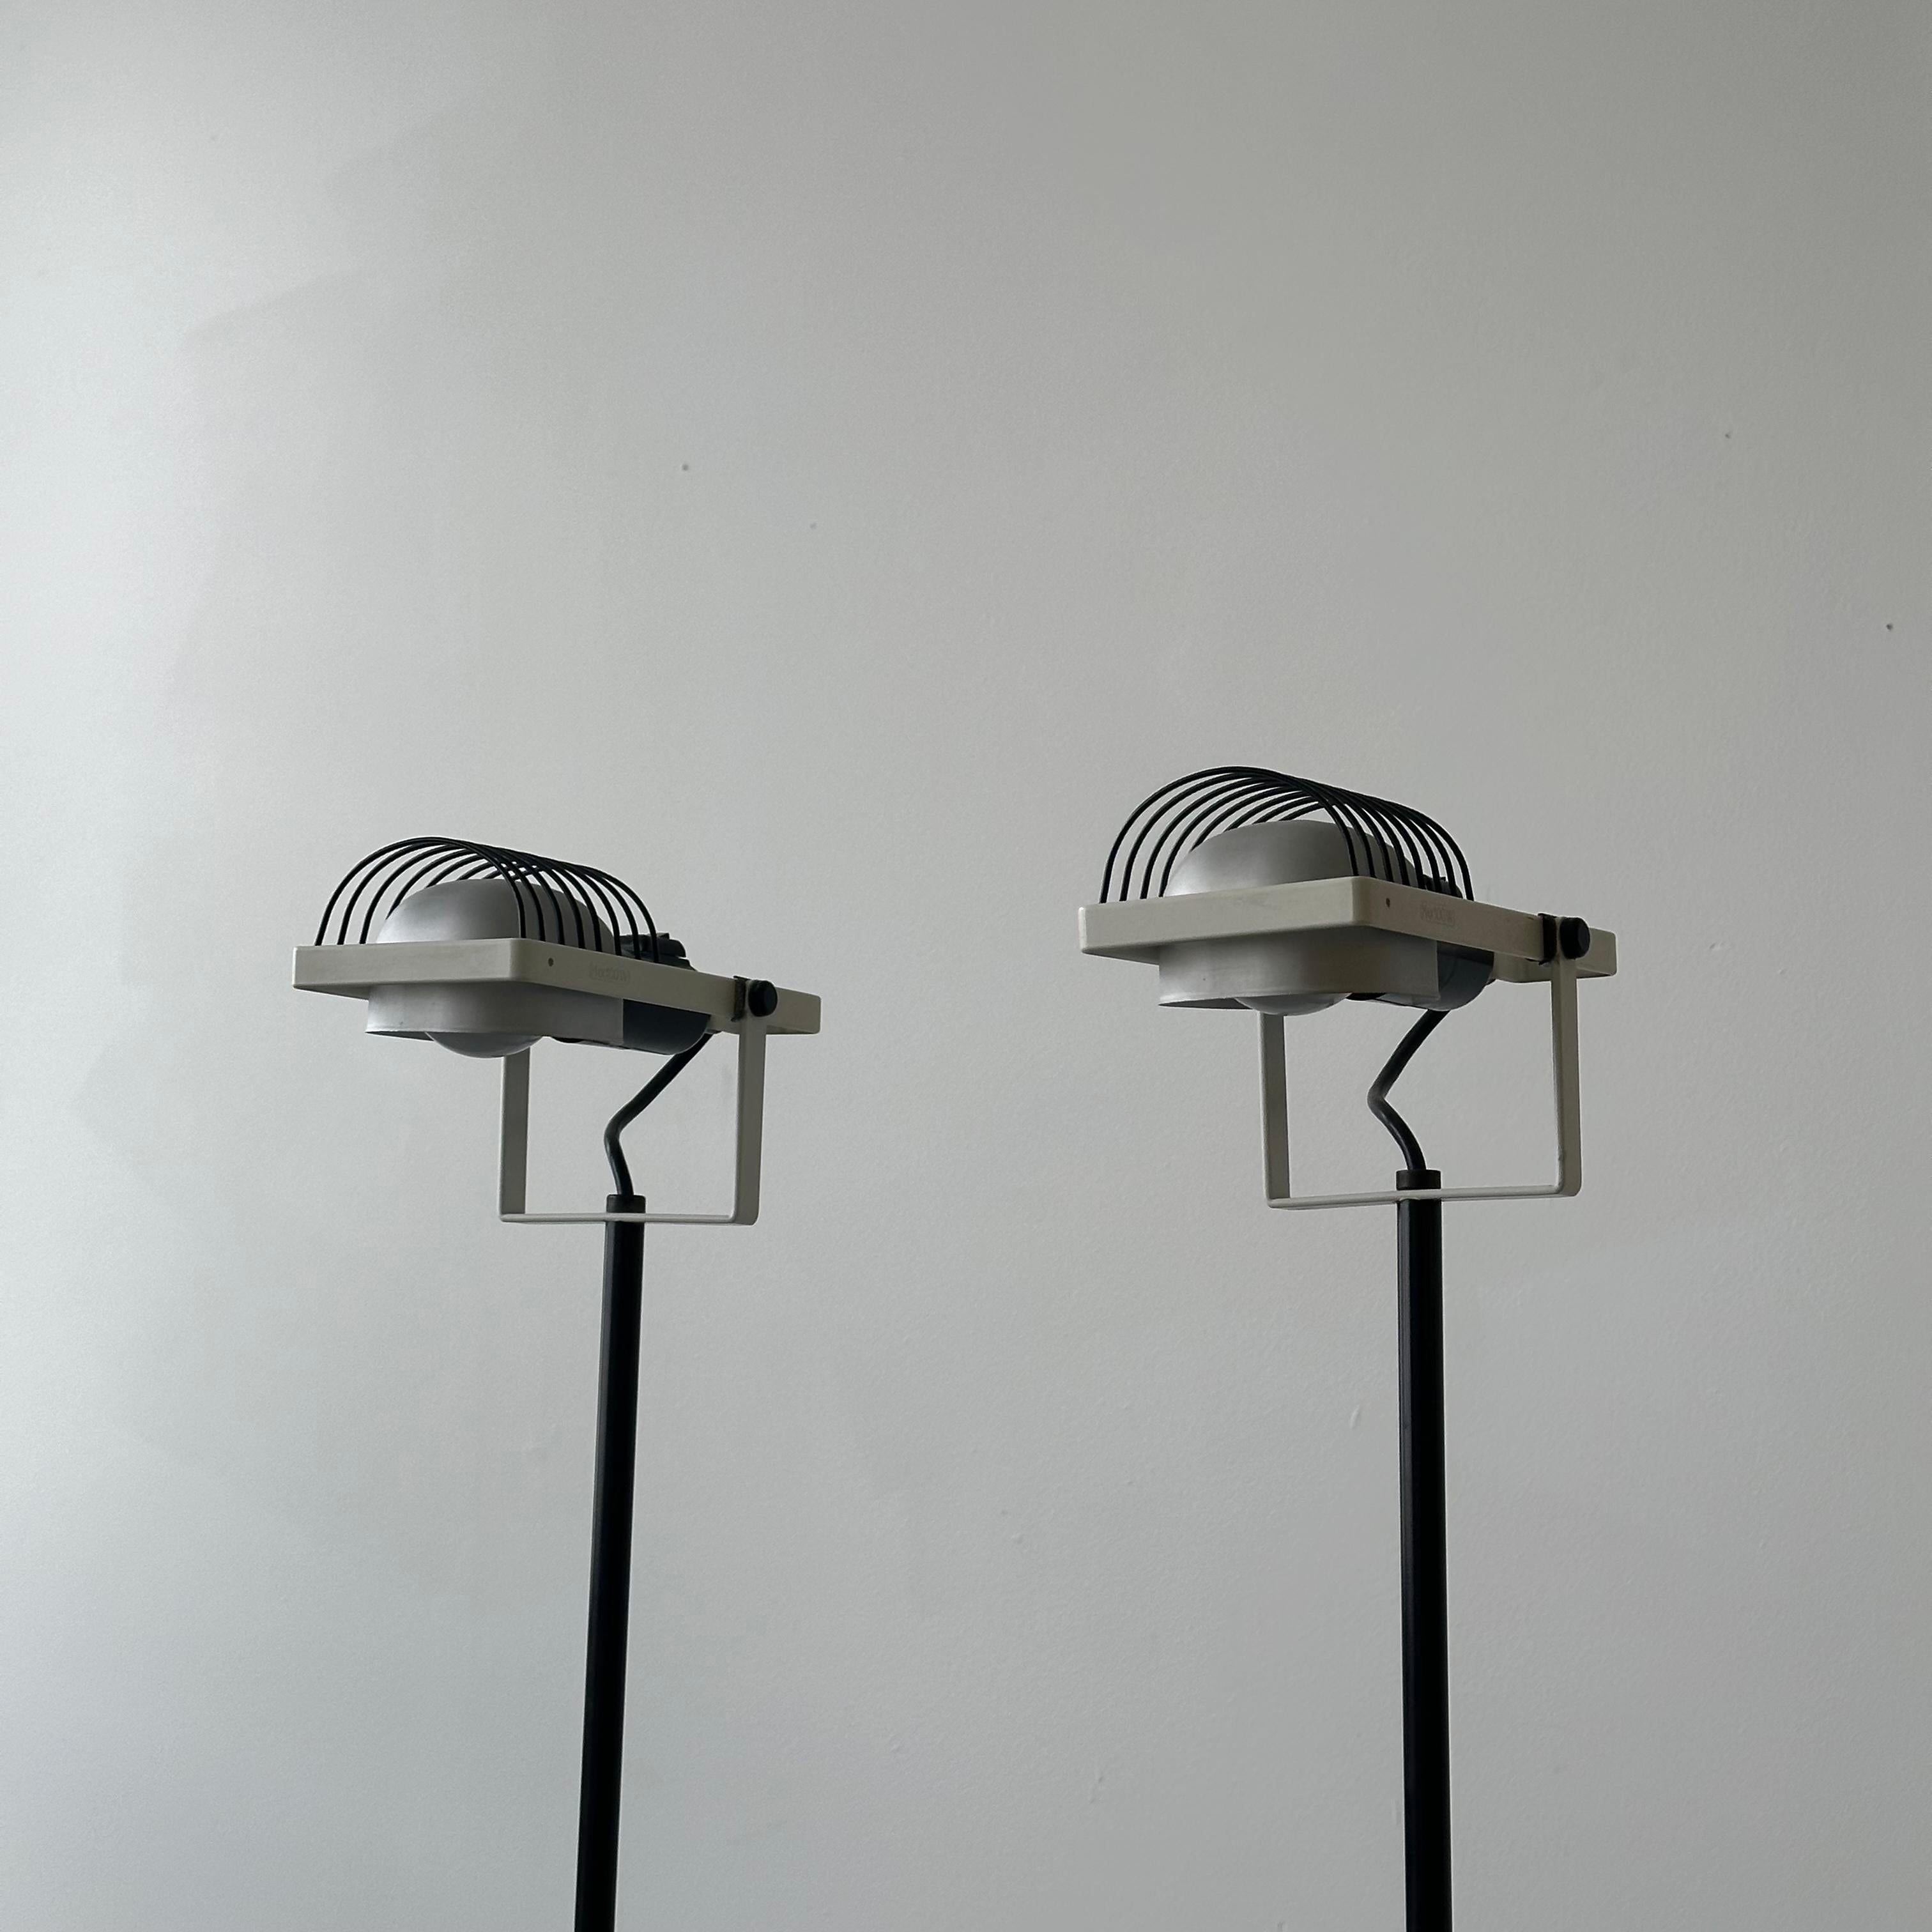 Ernesto Gismondi Floor Lamps for Artemide, a pair In Good Condition For Sale In Chicago, IL